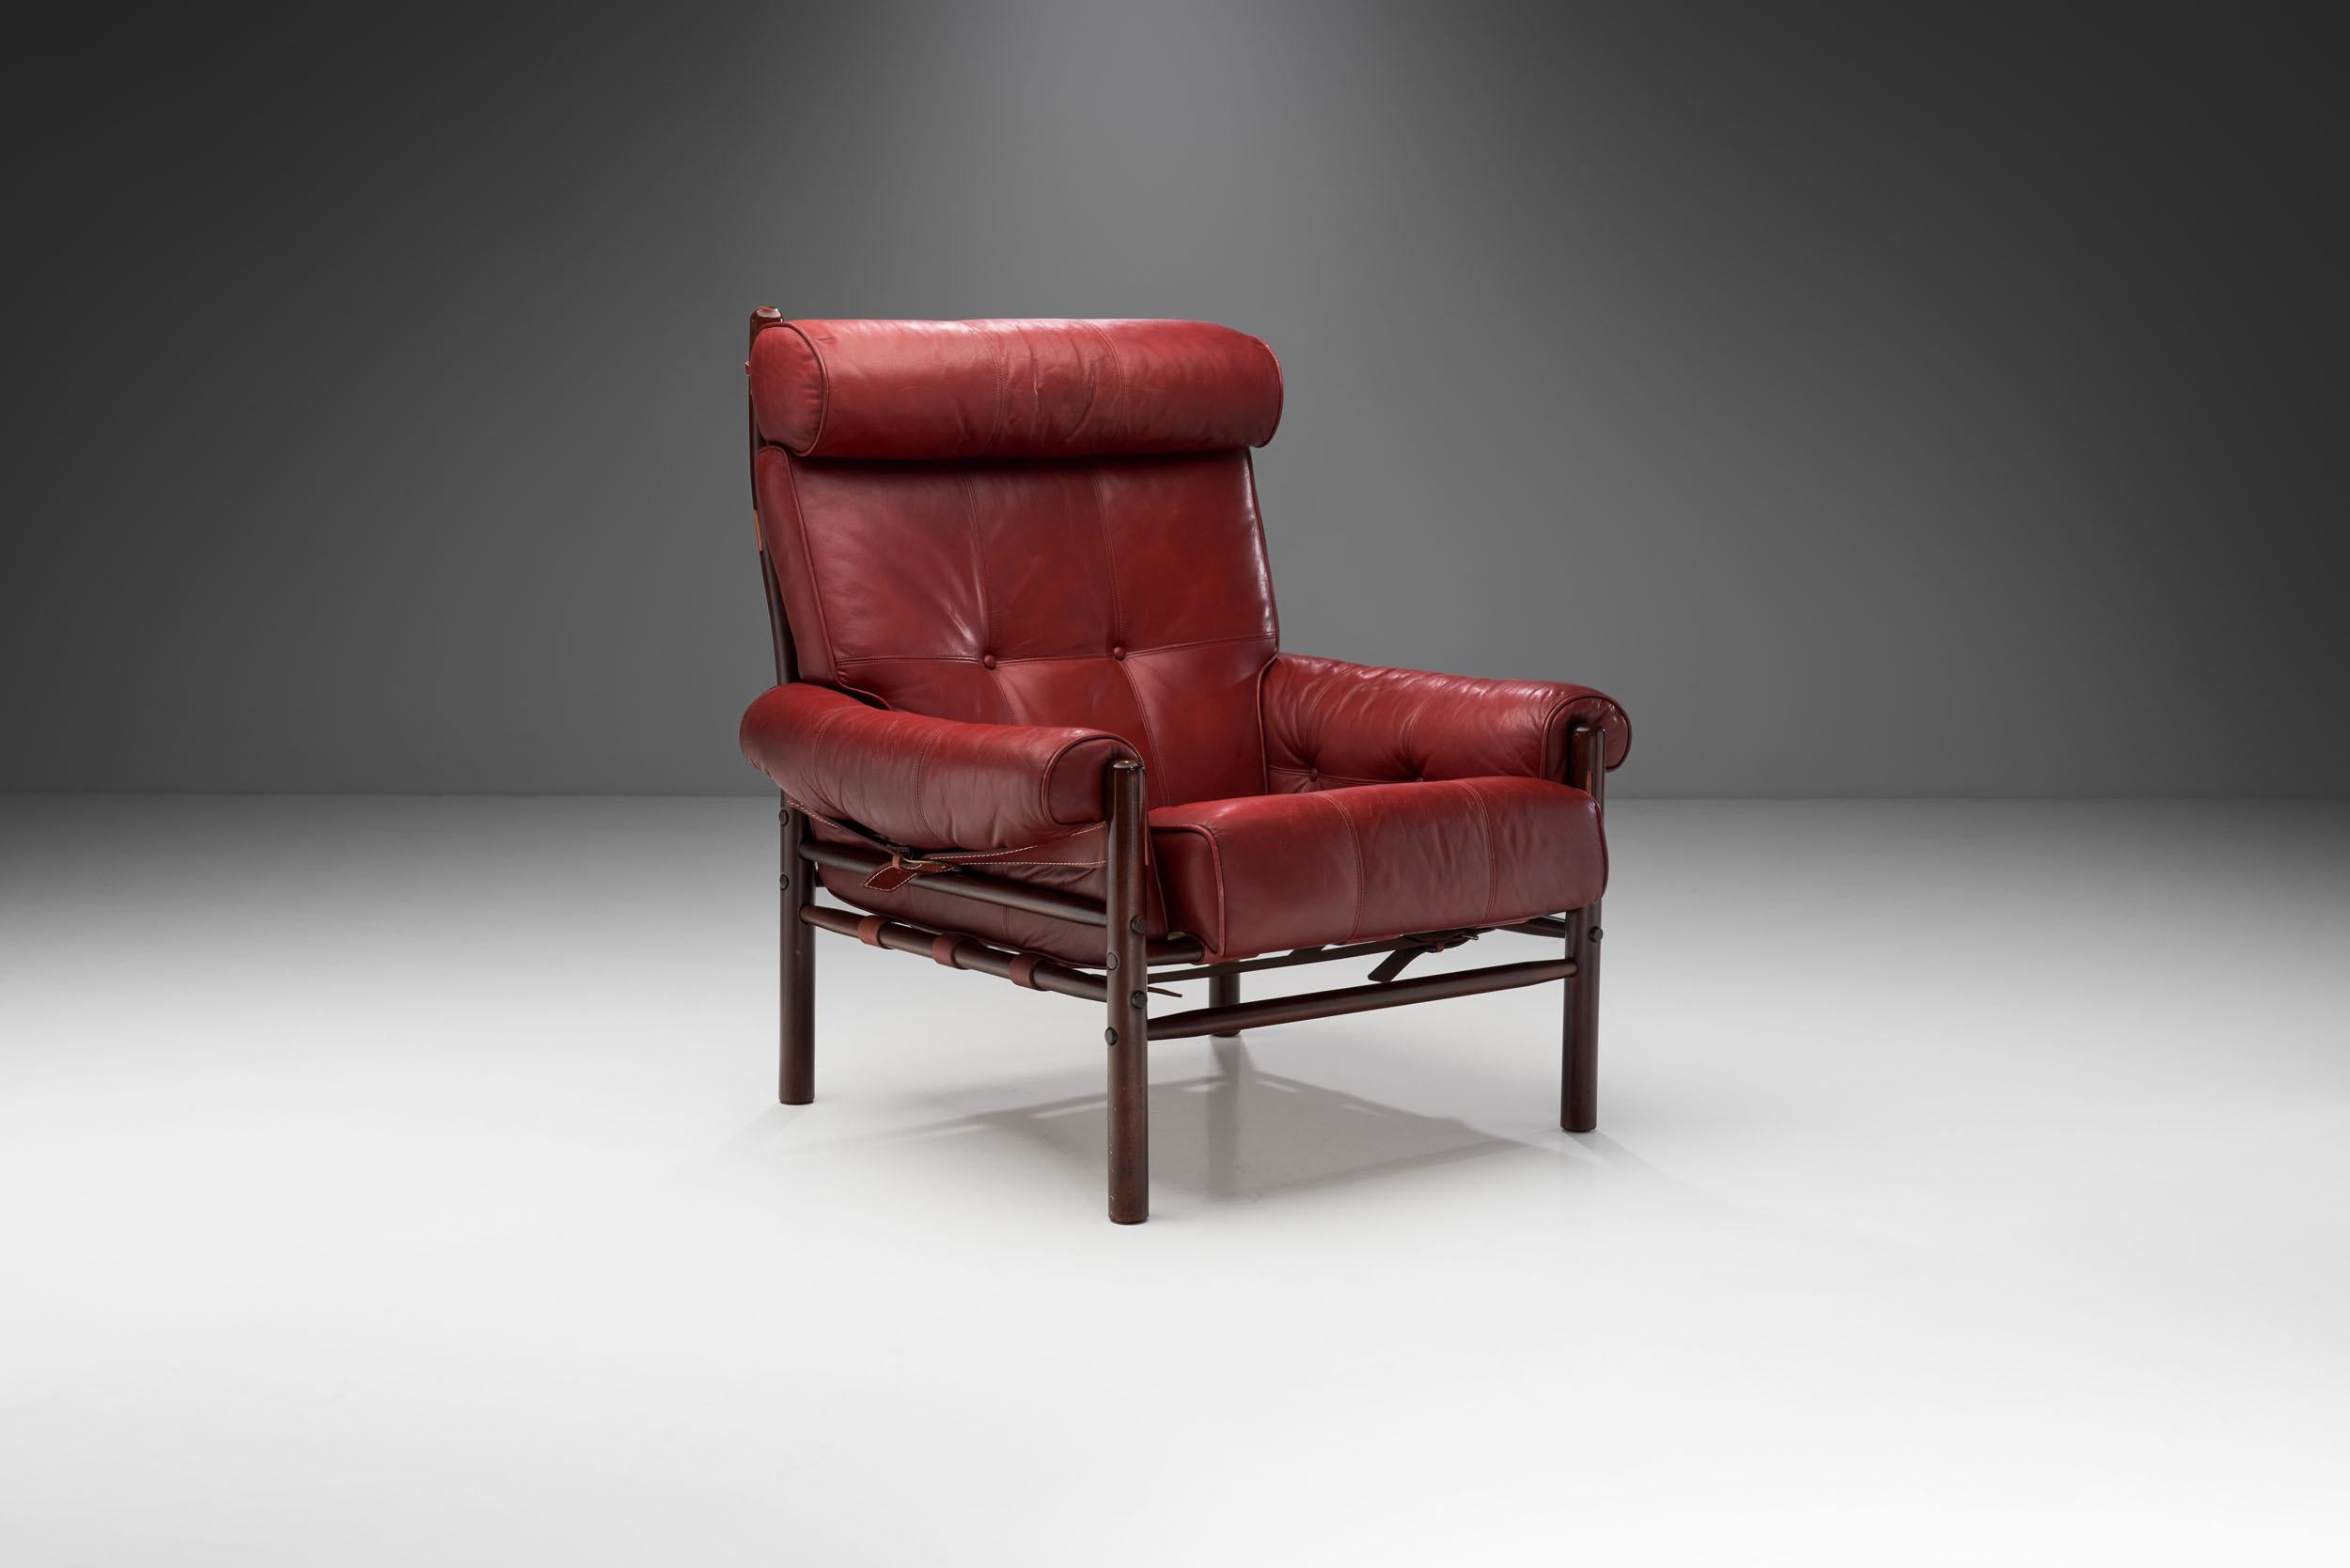 This amazing “Inca” lounge chair by Swedish design icon, Arne Norell, is one of his most coveted designs thanks to its unique look and details. It shouldn’t come as a surprise then, that this model is also a personal favourite among several interior